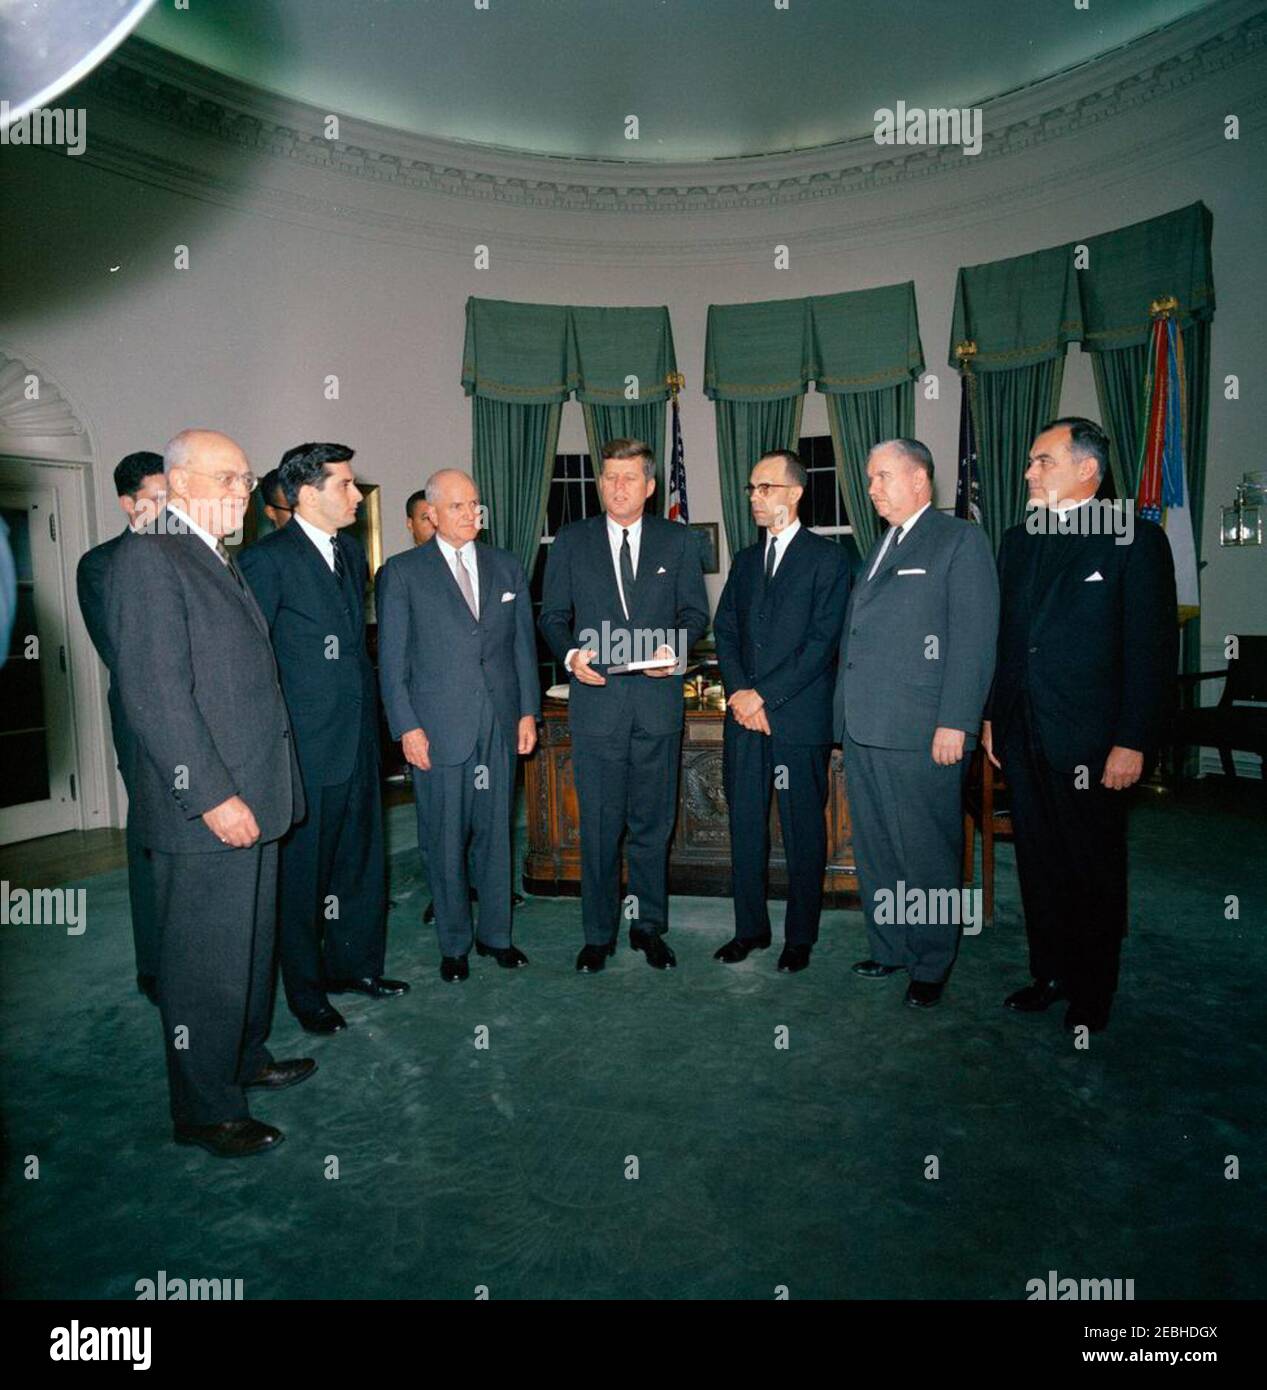 Meeting with the US Commission on Civil Rights, 5:10PM. President John F. Kennedy (center) delivers remarks upon receiving a bound volume of the United States Commission on Civil Rightsu0027 report, u0022Freedom to the Free,u0022 presented to him and autographed by officers and members of the Commission, during a meeting in the Oval Office of the White House, Washington, D.C. Left to right: Robert S. Rankin, Chairman of the Political Science Department at Duke University; William L. Taylor, Commission Assistant Staff Director for Liaison and Information (in back, partially hidden); Berl I. Stock Photo